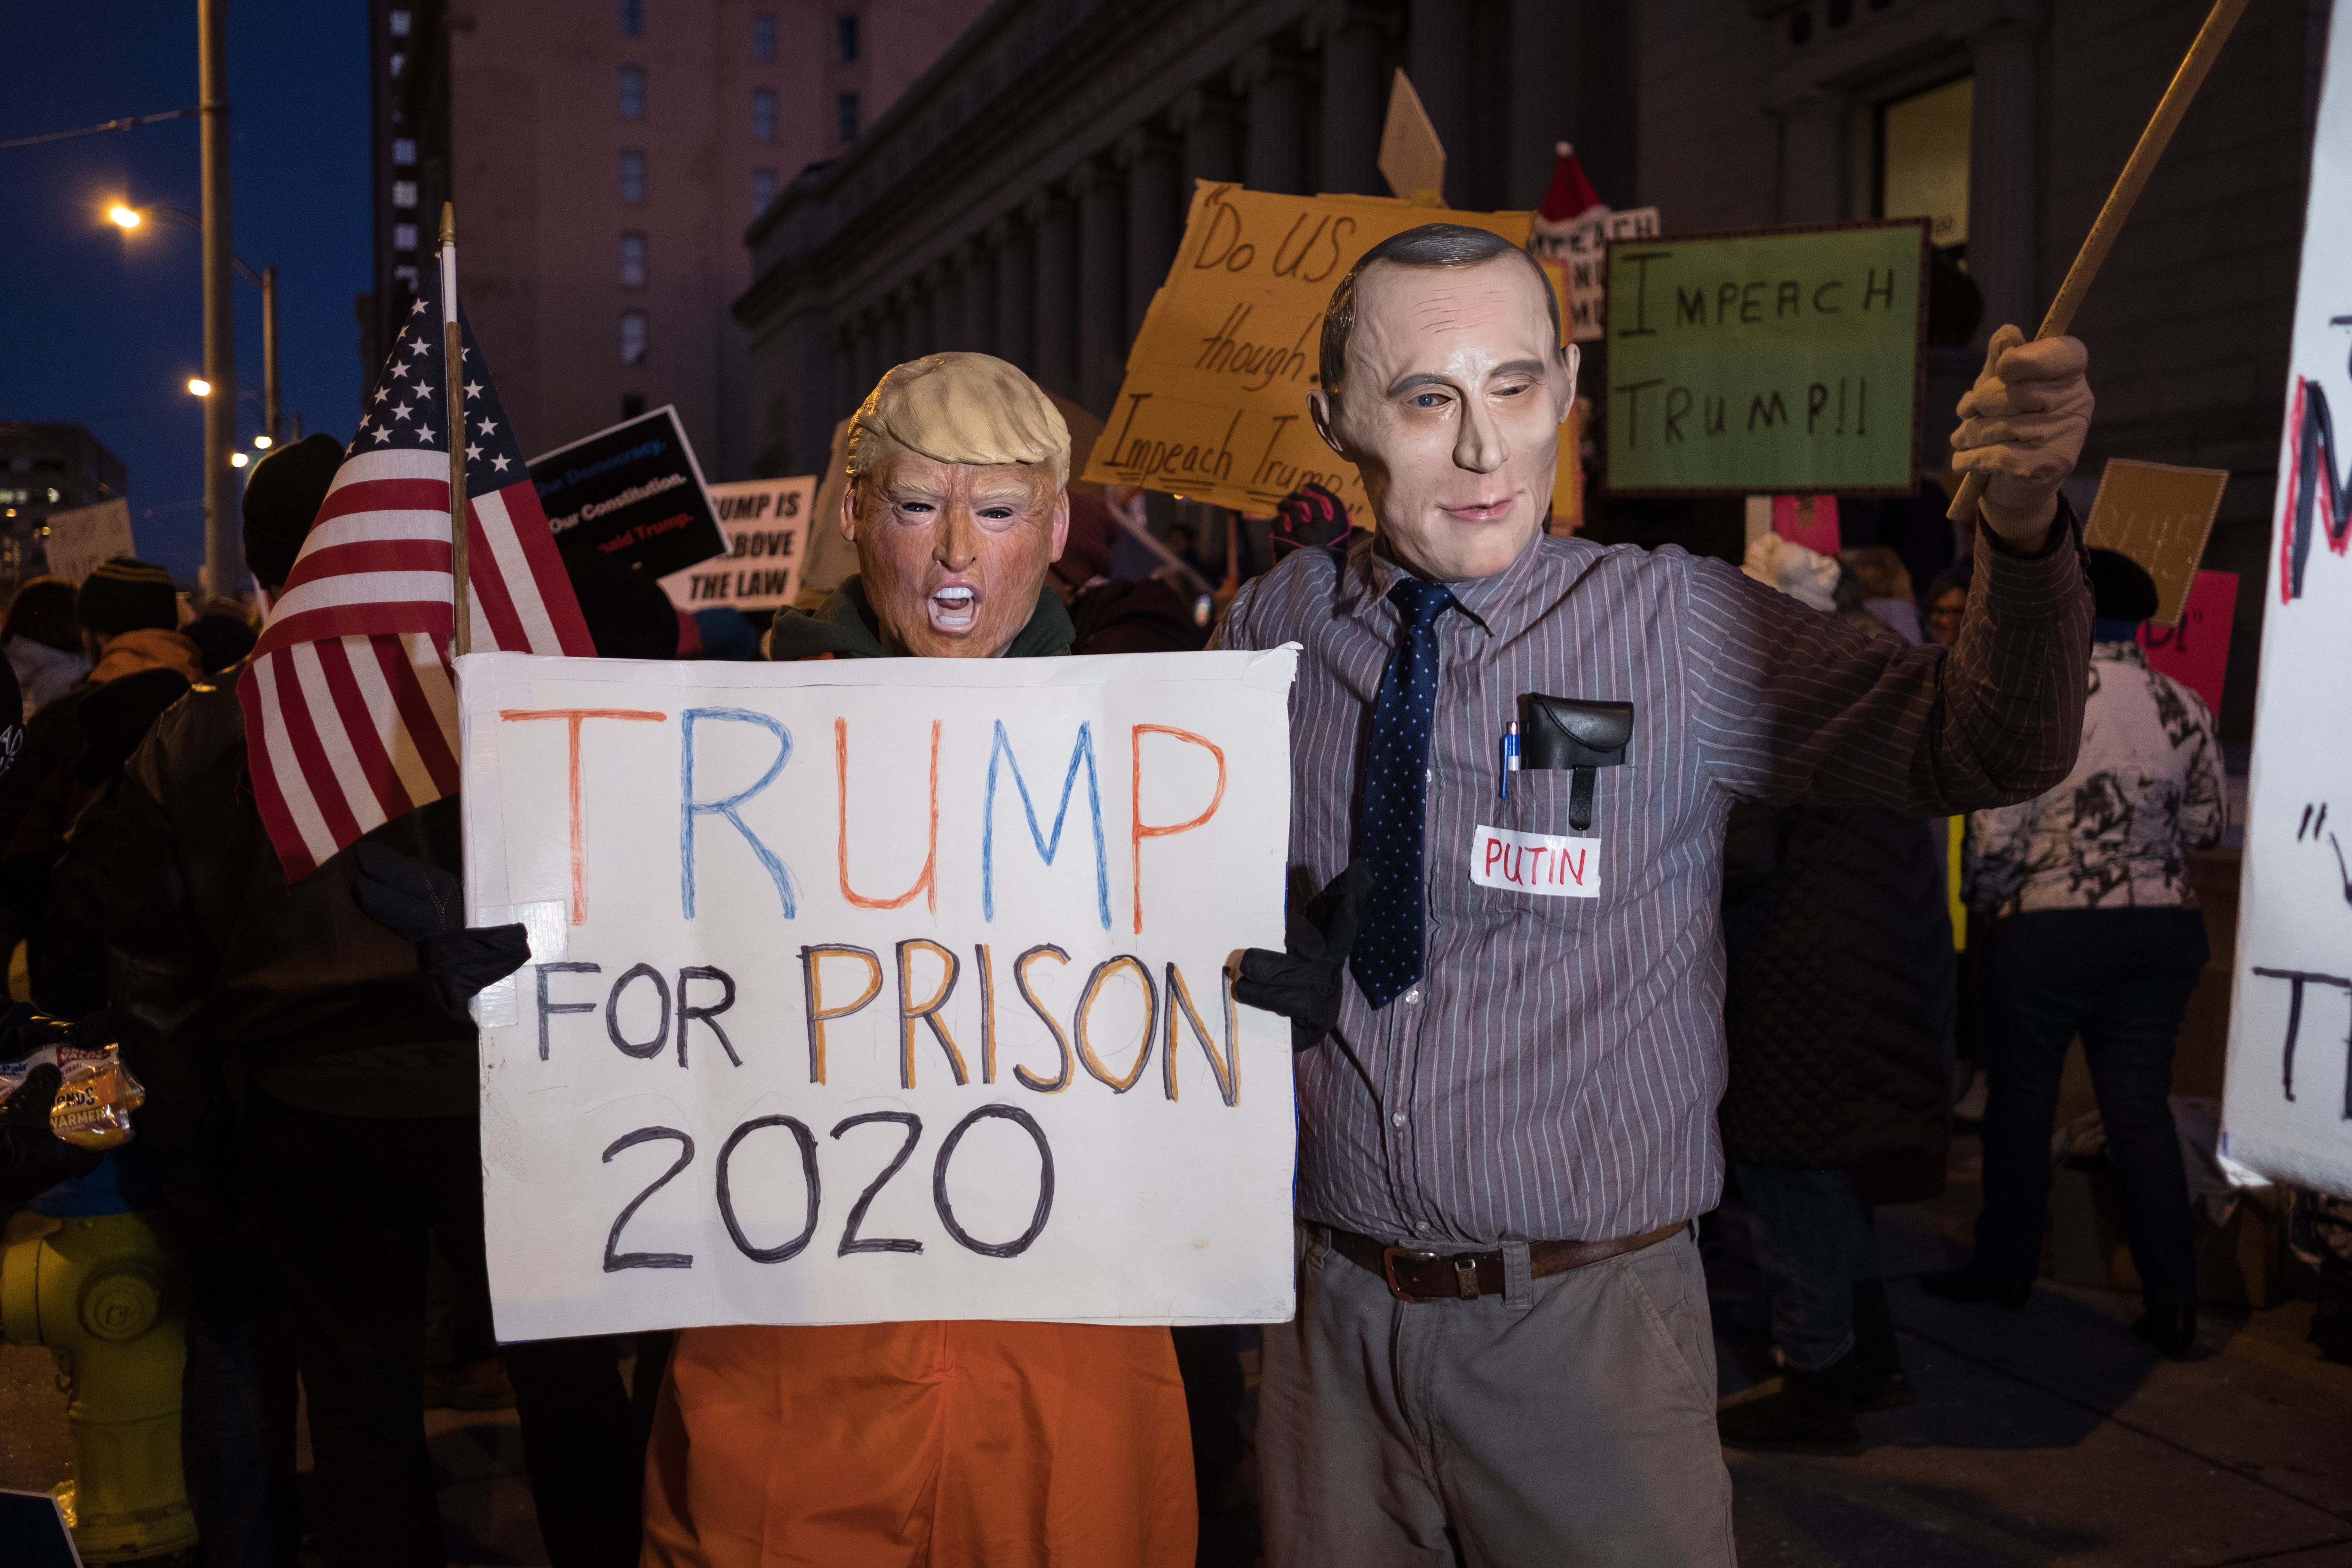 Protesters dressed as Trump and Putin take part during a Trump pro-impeachment rally in Dayton.